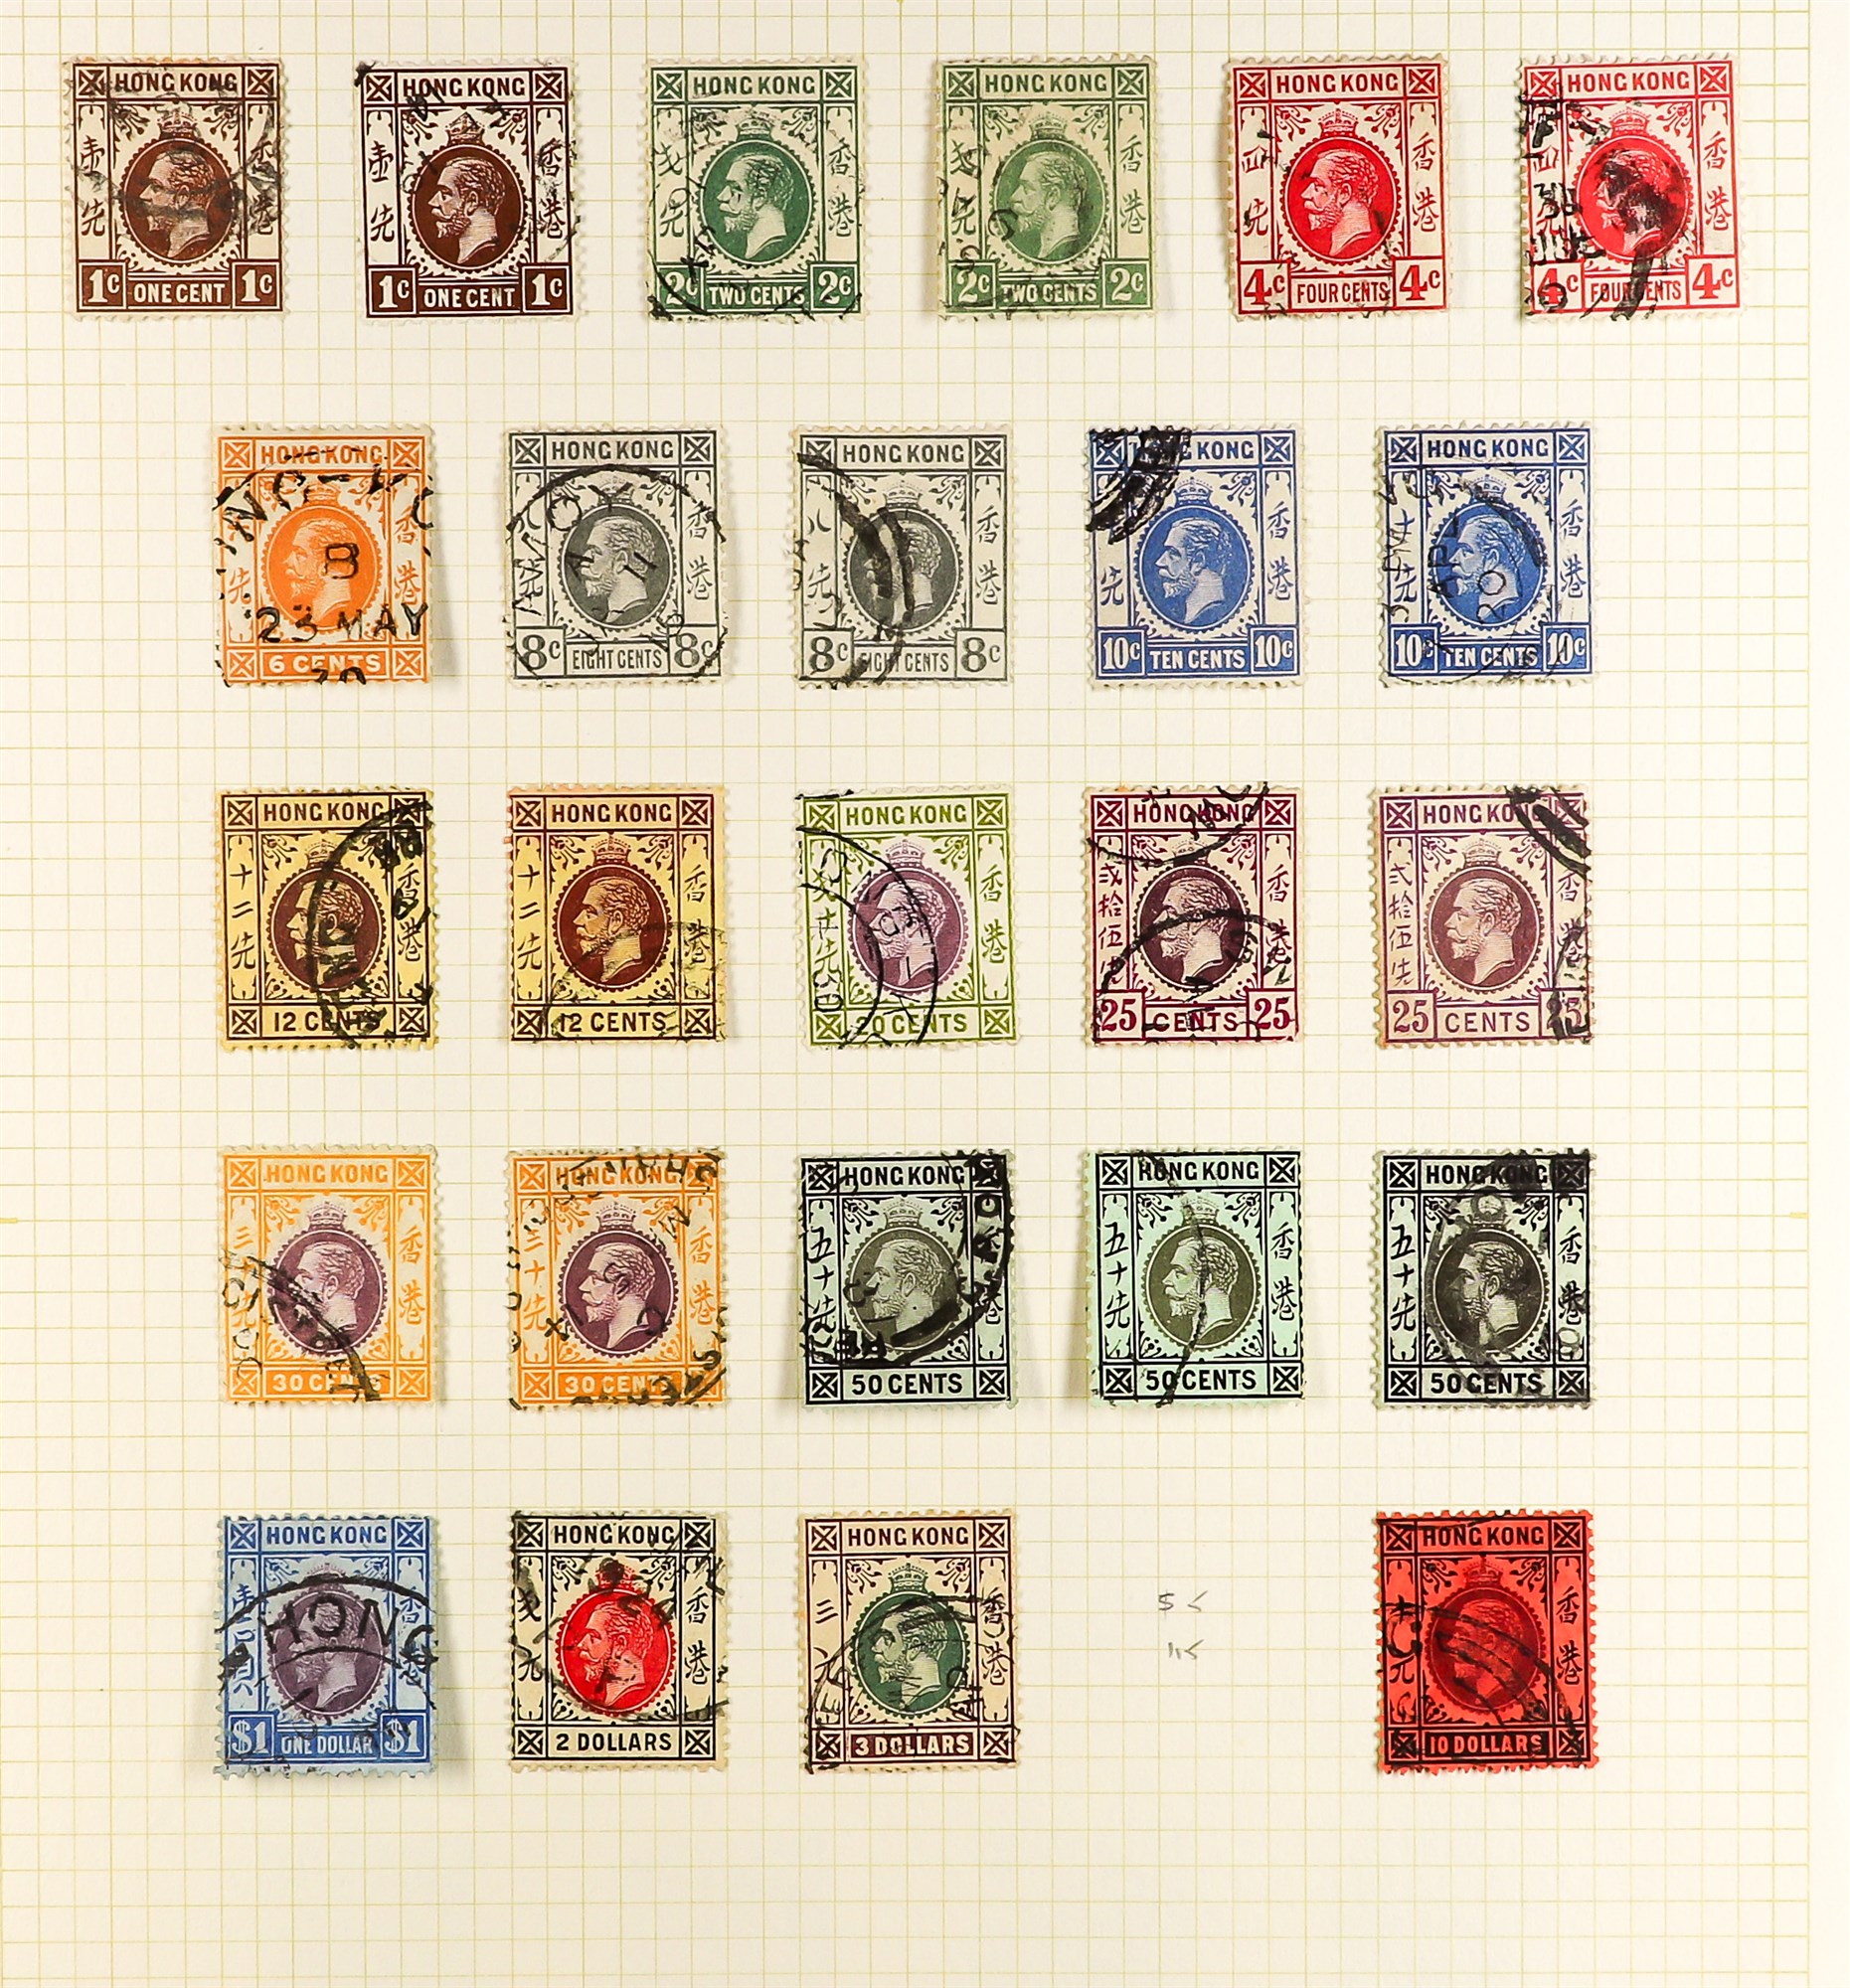 HONG KONG 1912 - 1952 COLLECTION of 92 used stamps on pages, note 1912-21 set (no $5) with both